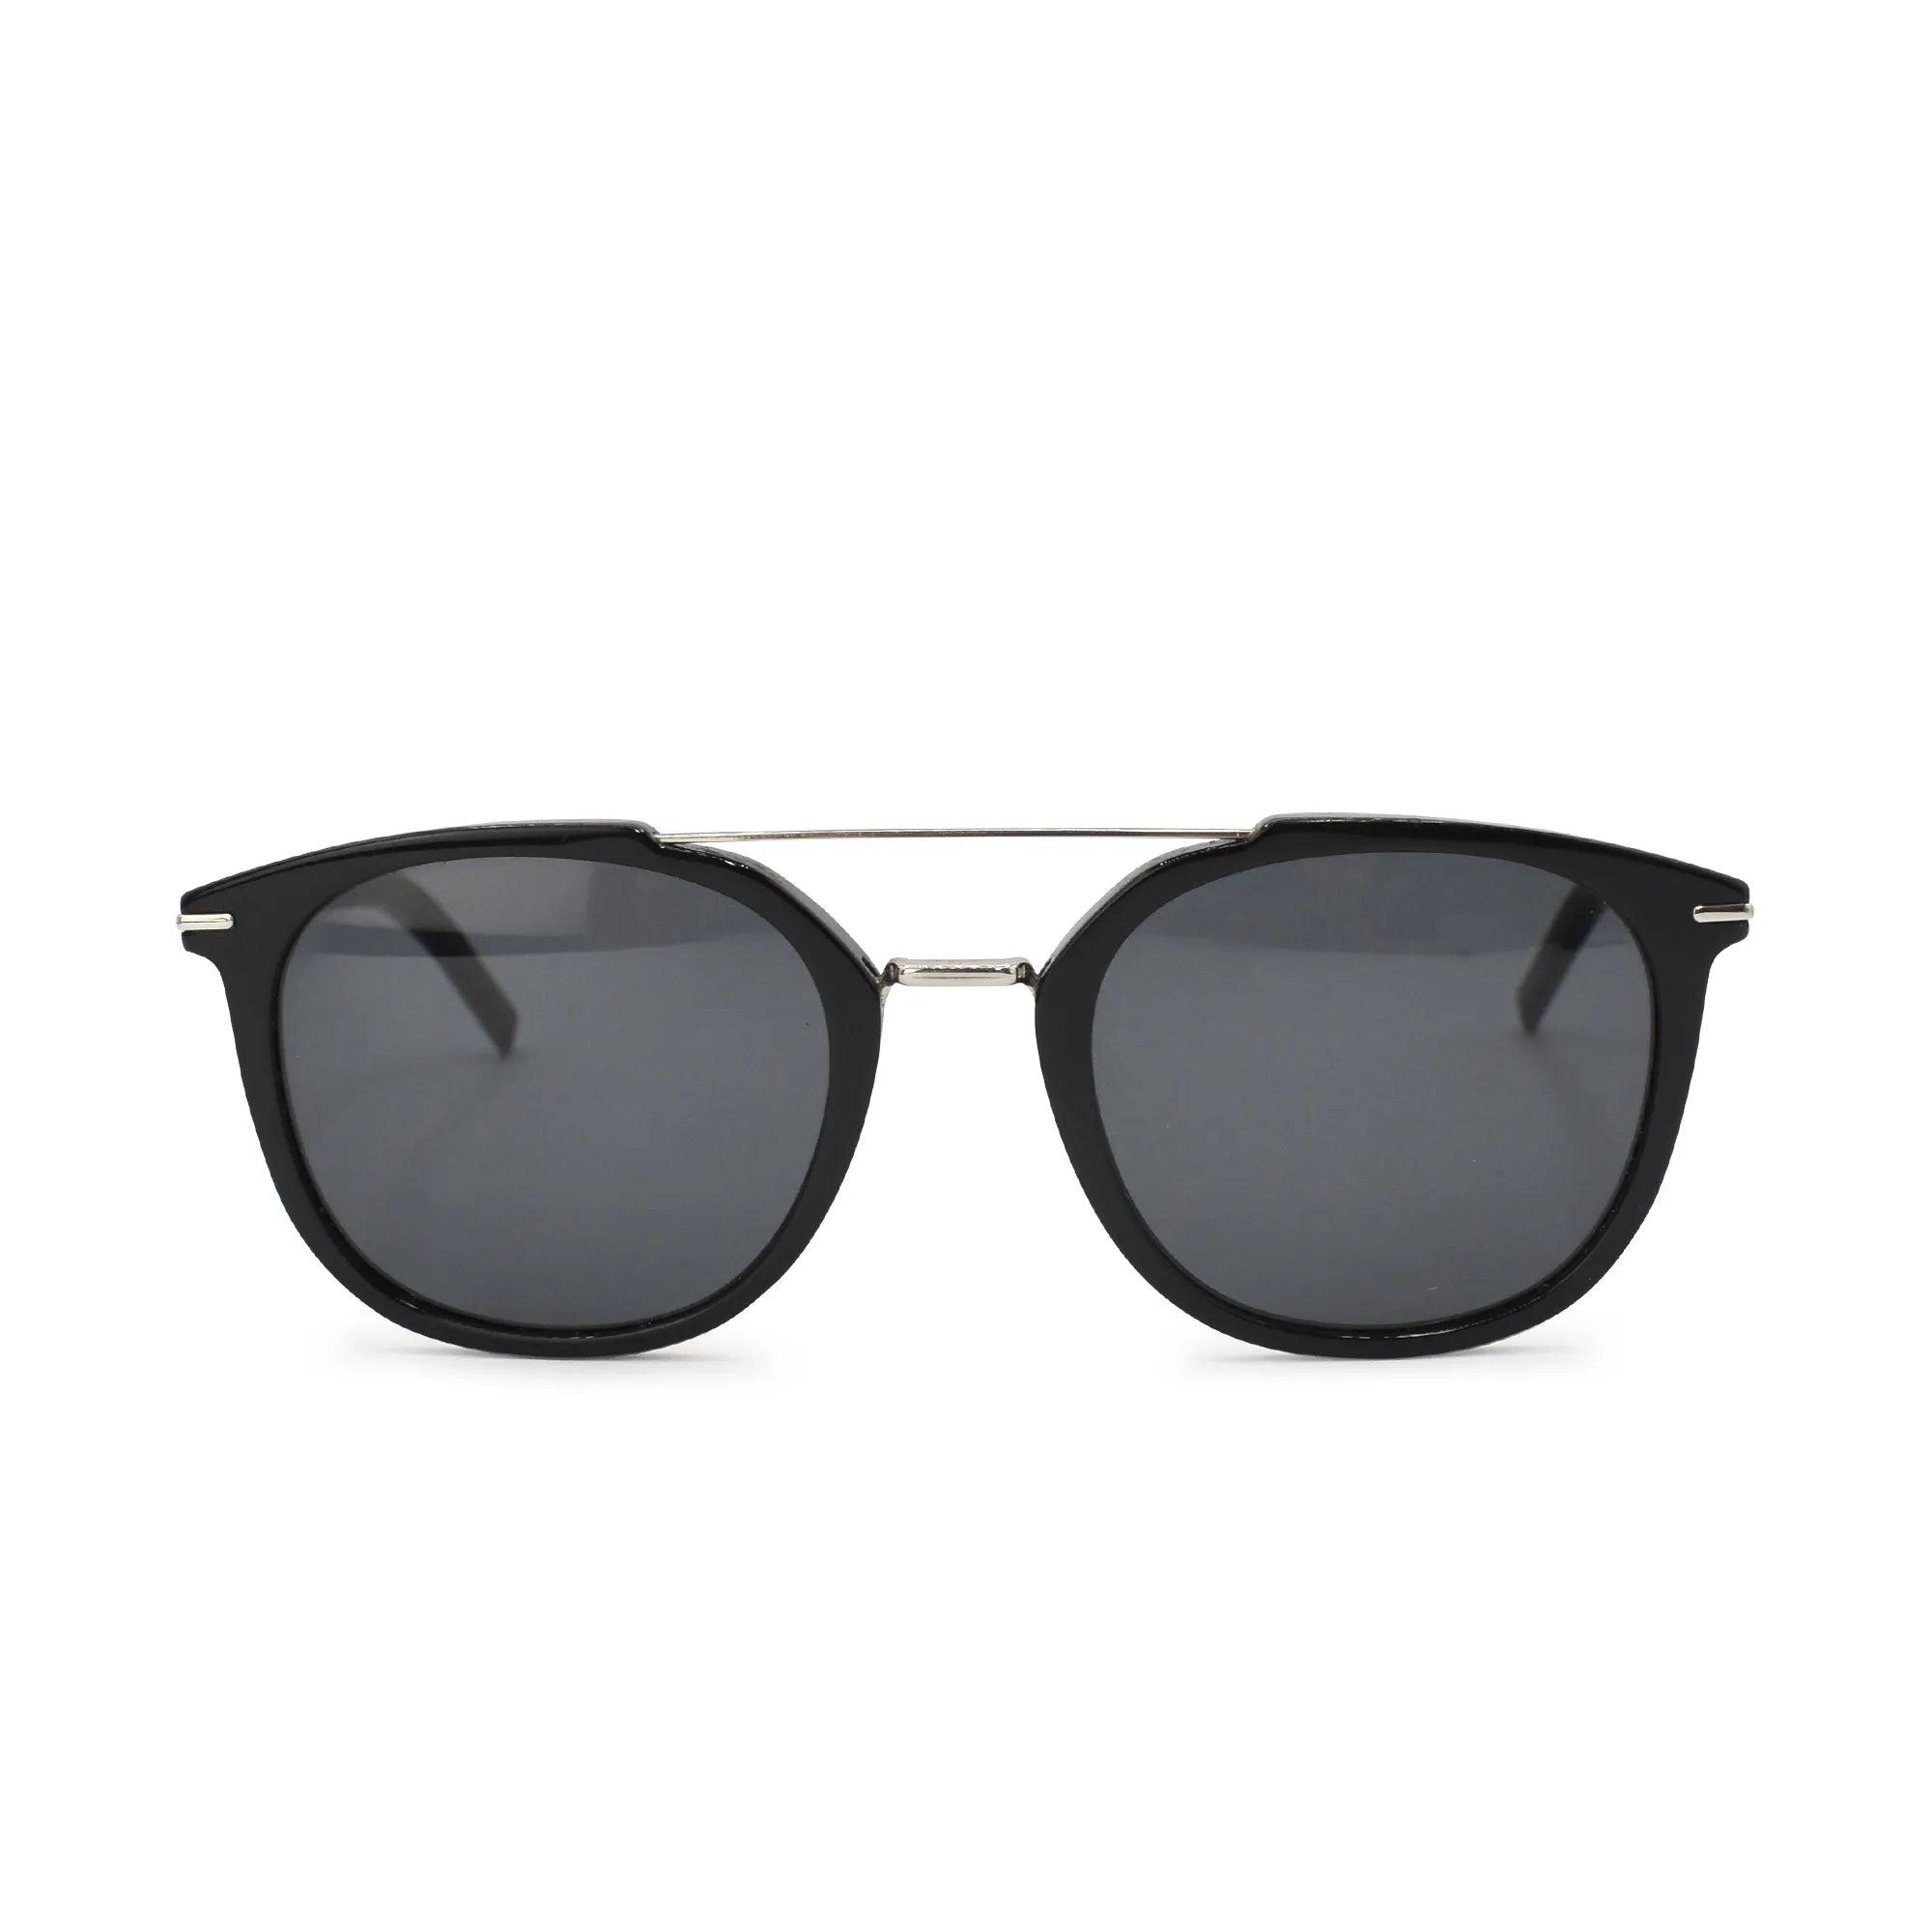 Dior Homme 'Blacktie' Sunglasses - Fashionably Yours